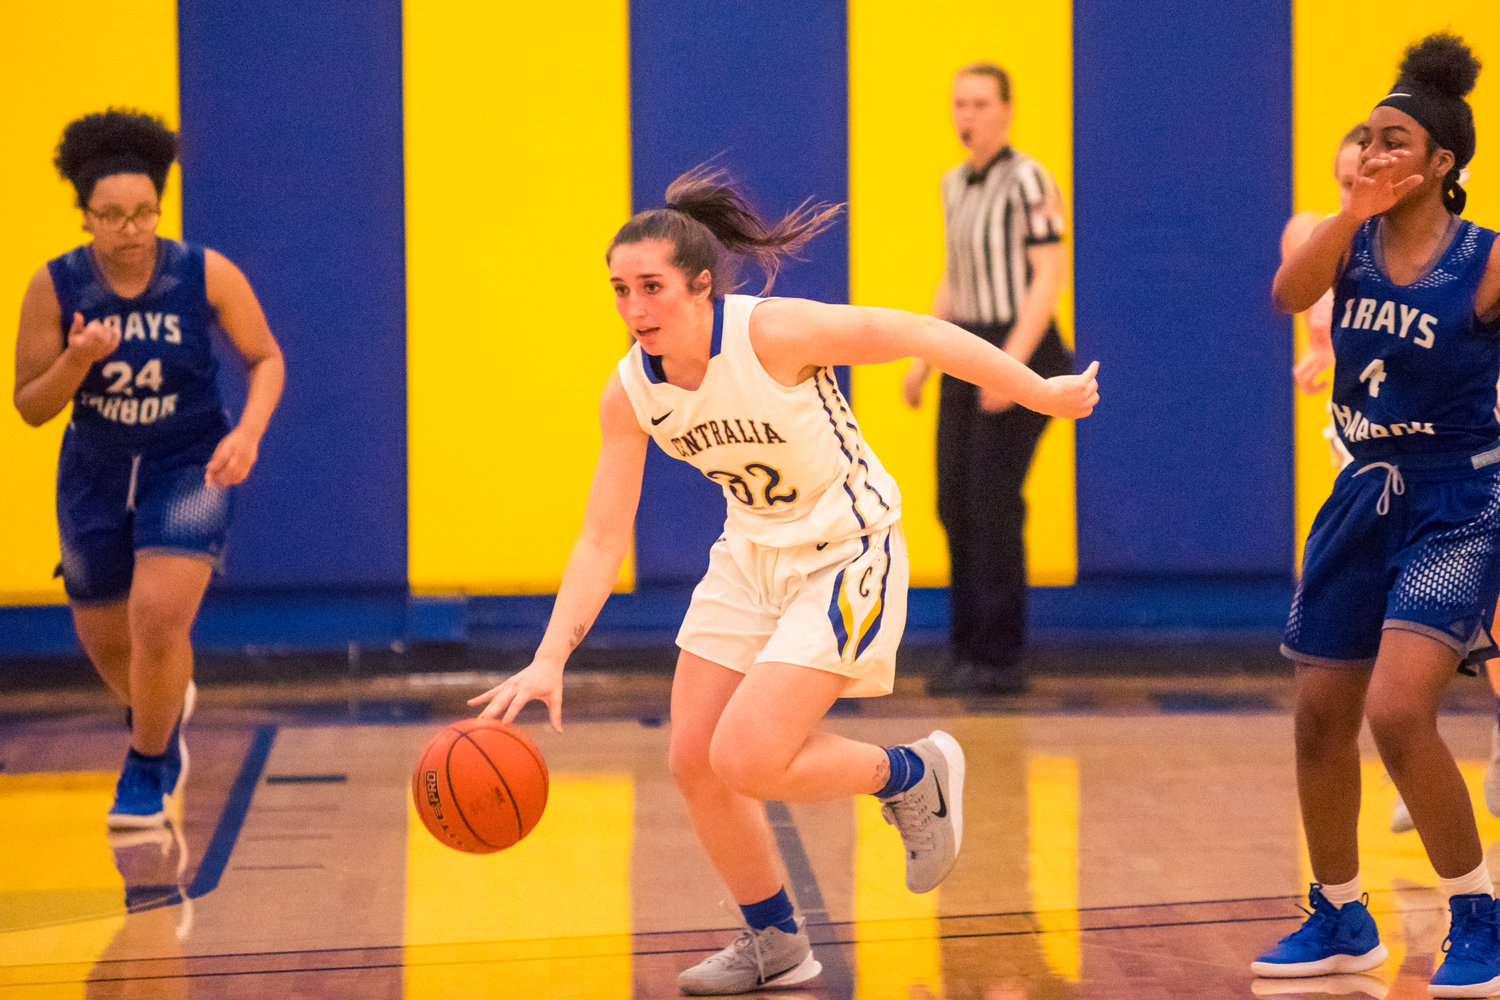 Centralia's Lindsey Nurmi (32) dribbles the ball down court during a game against Grays Harbor Wednesday night at Centralia College.